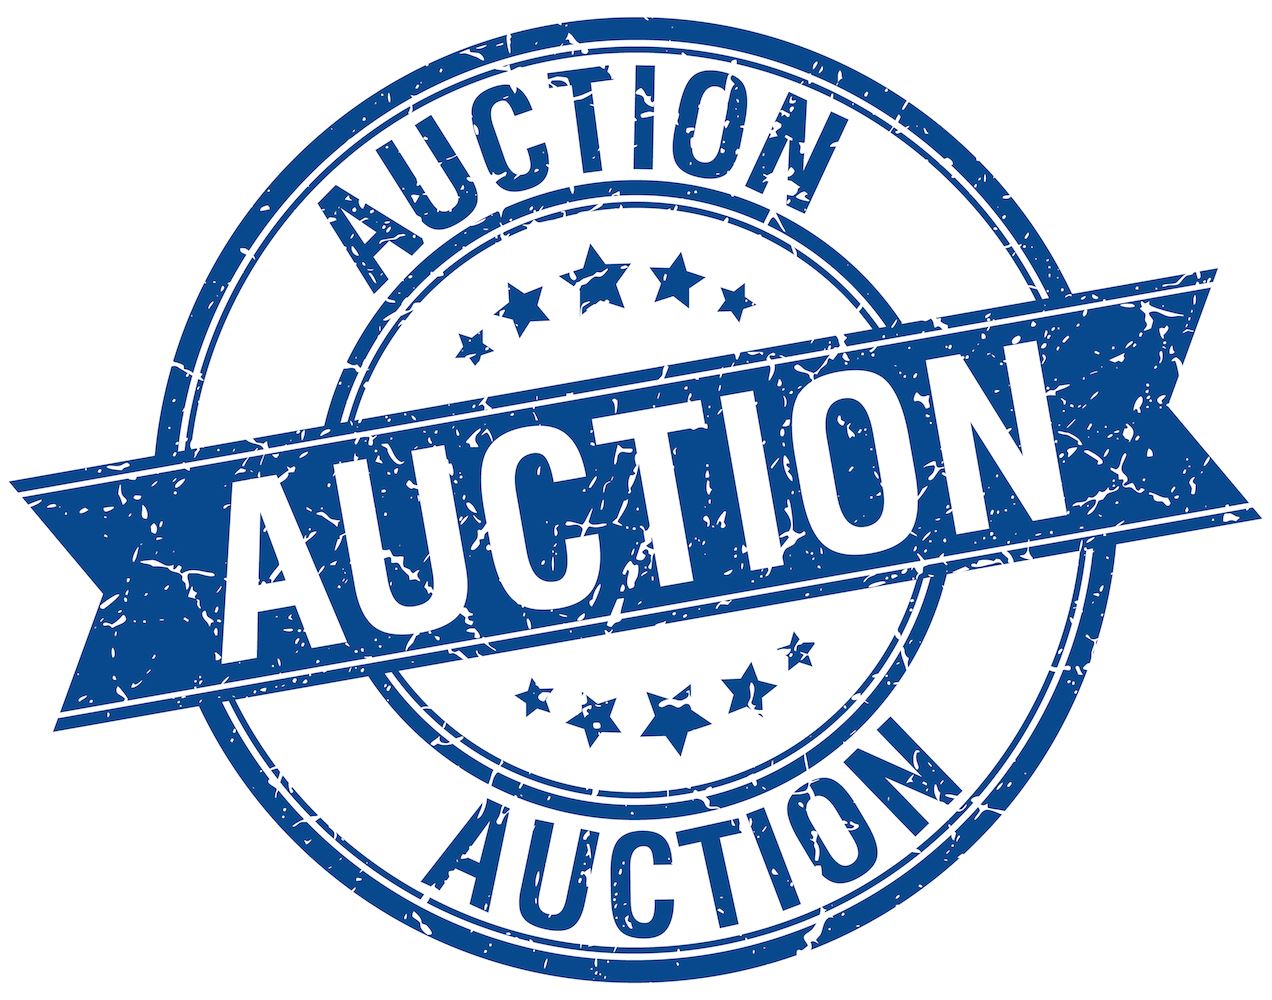 Donate to Auction